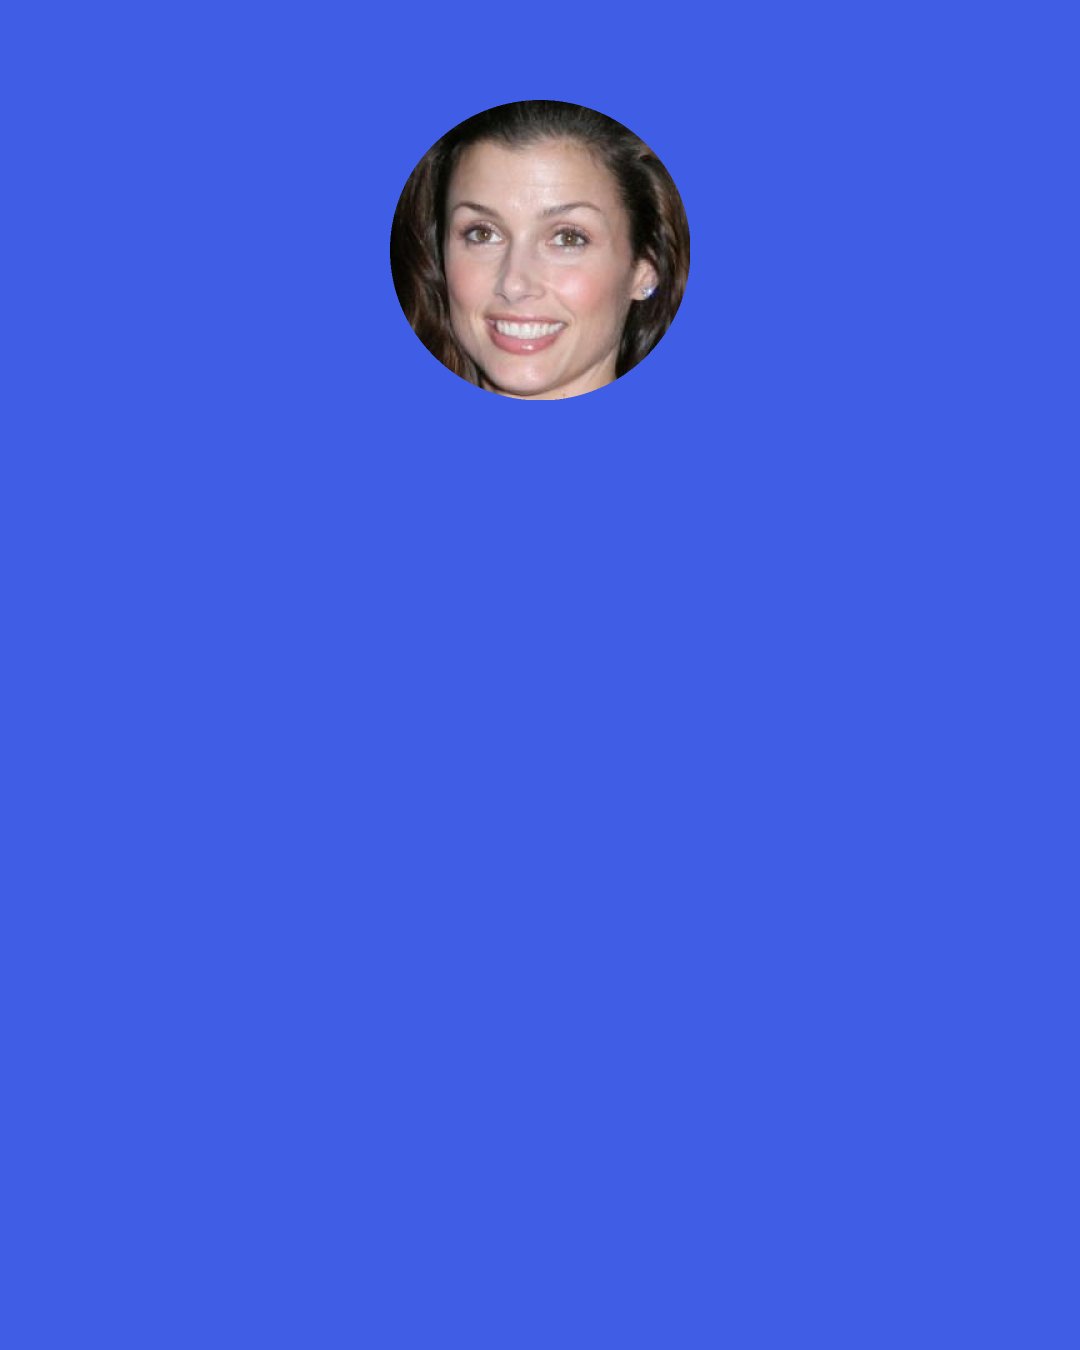 Bridget Moynahan: If you’re healthy all around, you’ll feel better, and if you feel better, you’ll have a more positive outlook. It’s all connected.